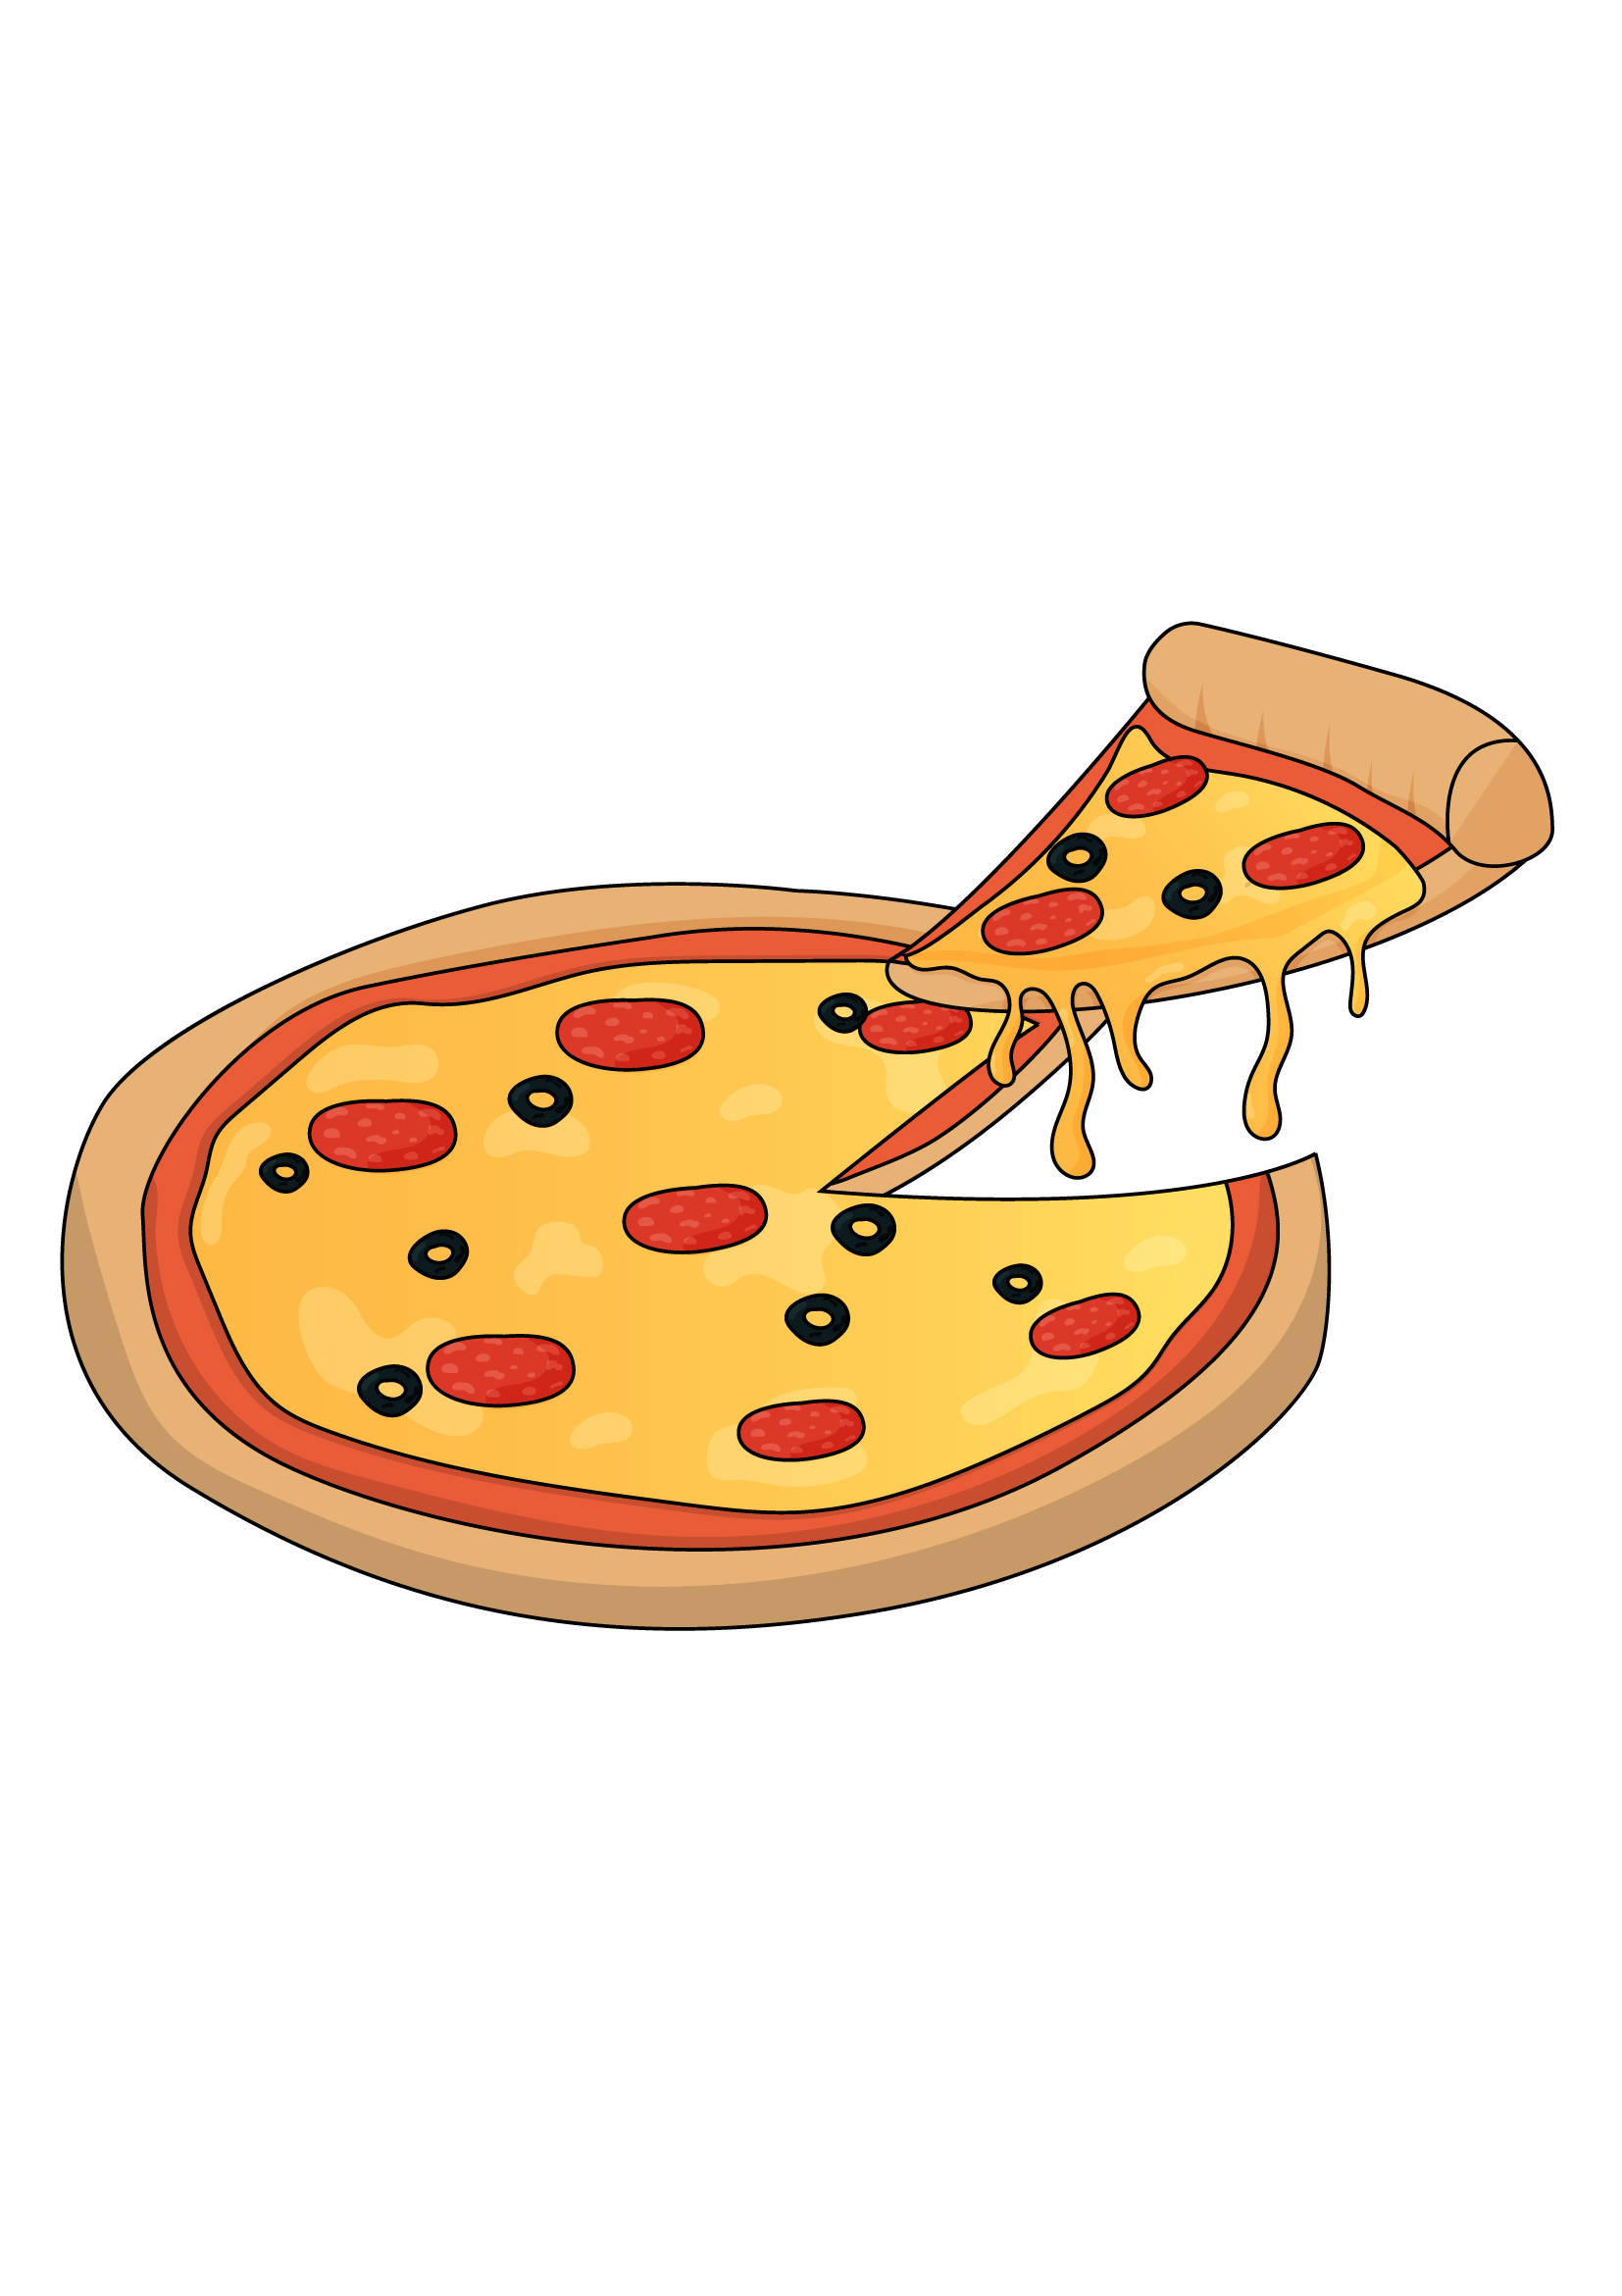 How to Draw A Pizza Step by Step Printable